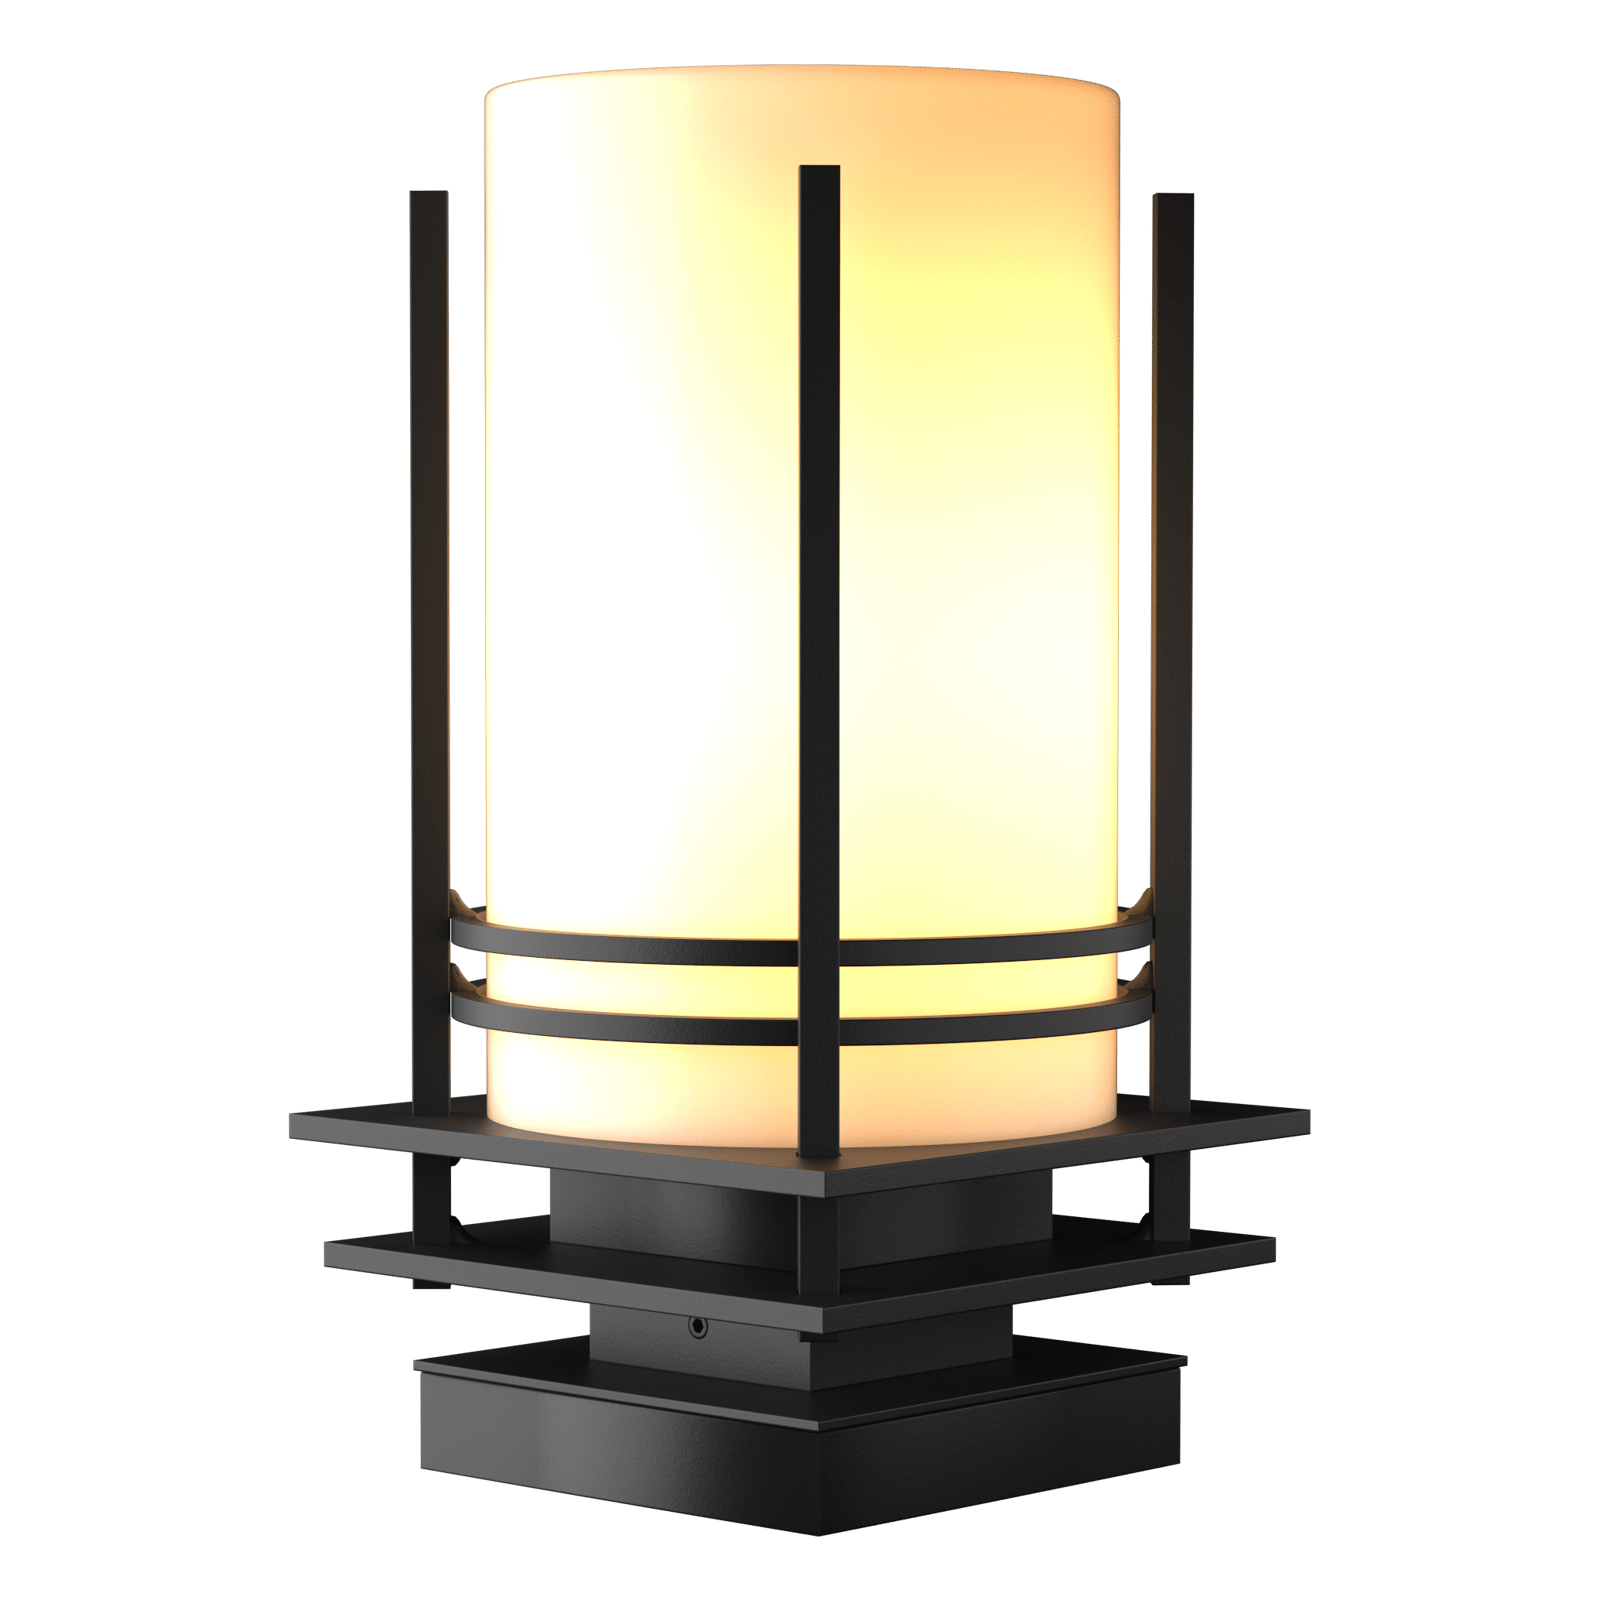 Hubbardton Forge Banded Outdoor Pier Mount Outdoor l Wall Hubbardton Forge Coastal Black Opal Glass (GG) 